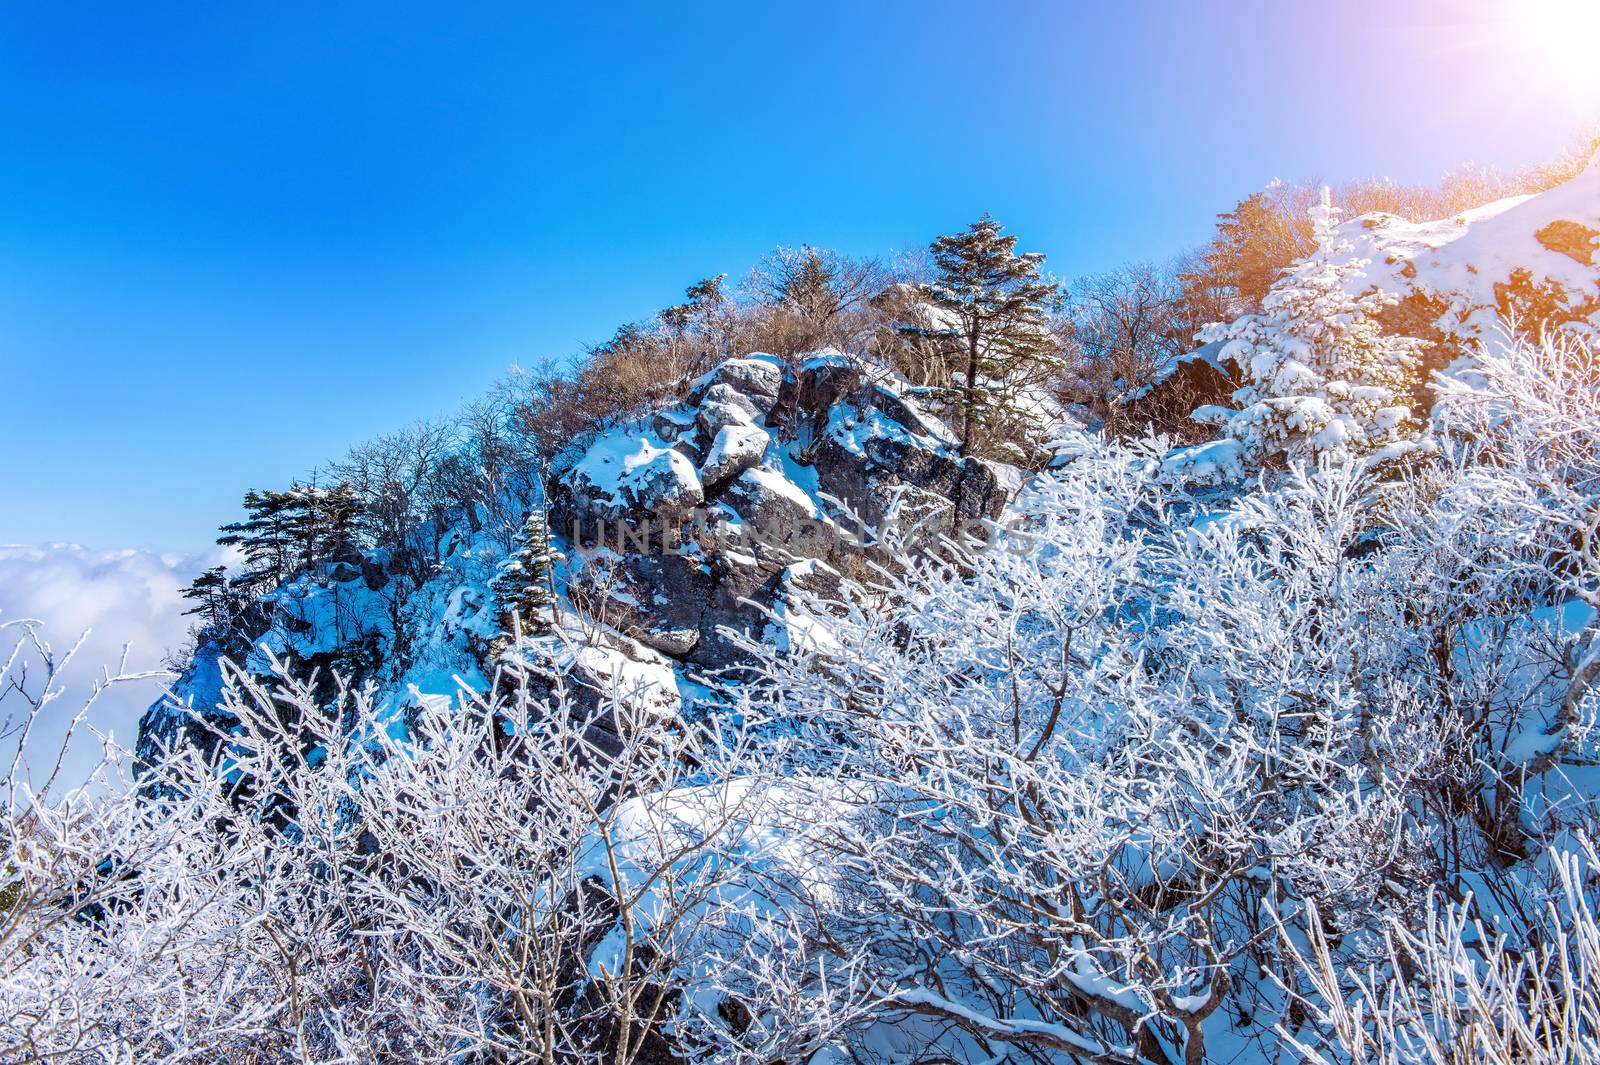 Seoraksan mountains is covered by snow in winter, Korea. by gutarphotoghaphy